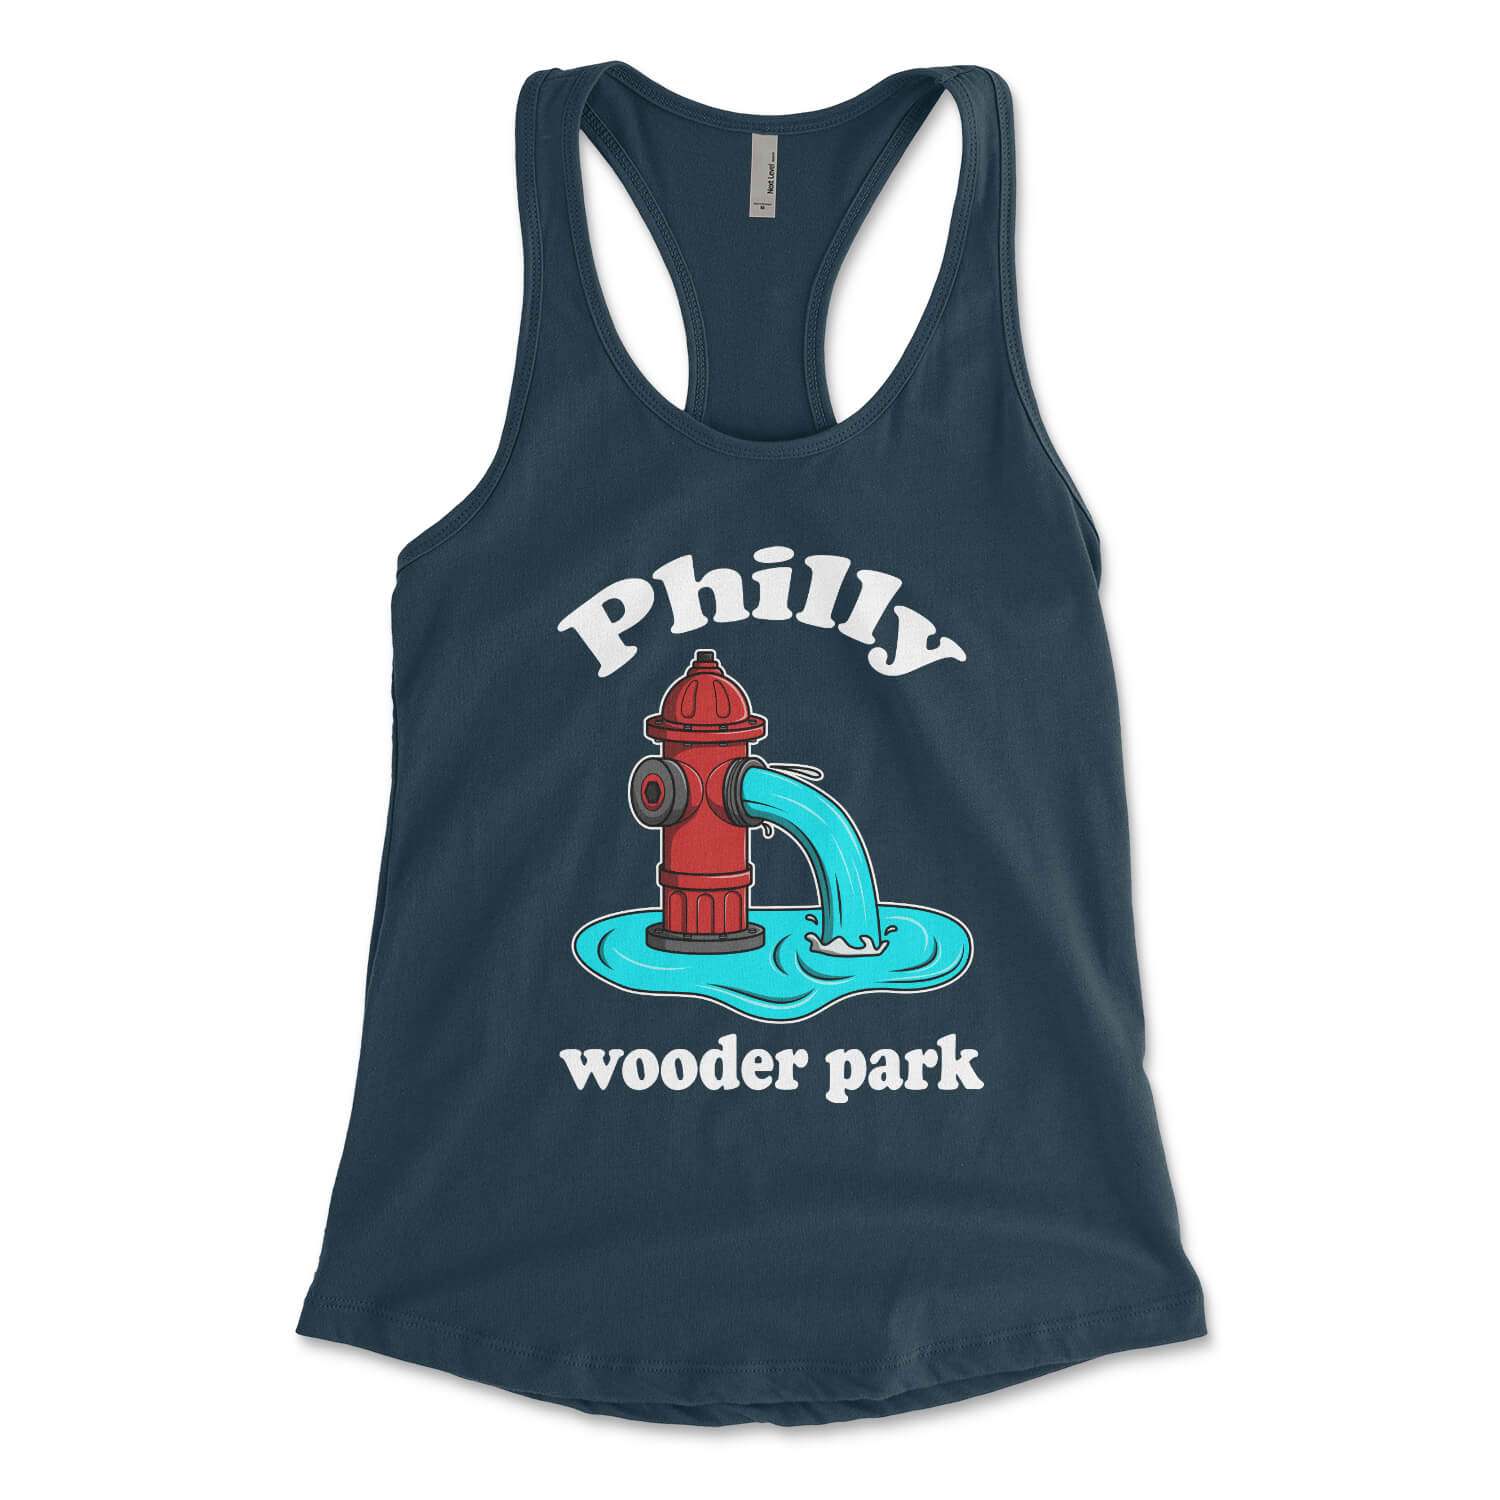 Philadelphia fire hydrant Philly wooder park on a navy blue womens racerback tank top from Phillygoat